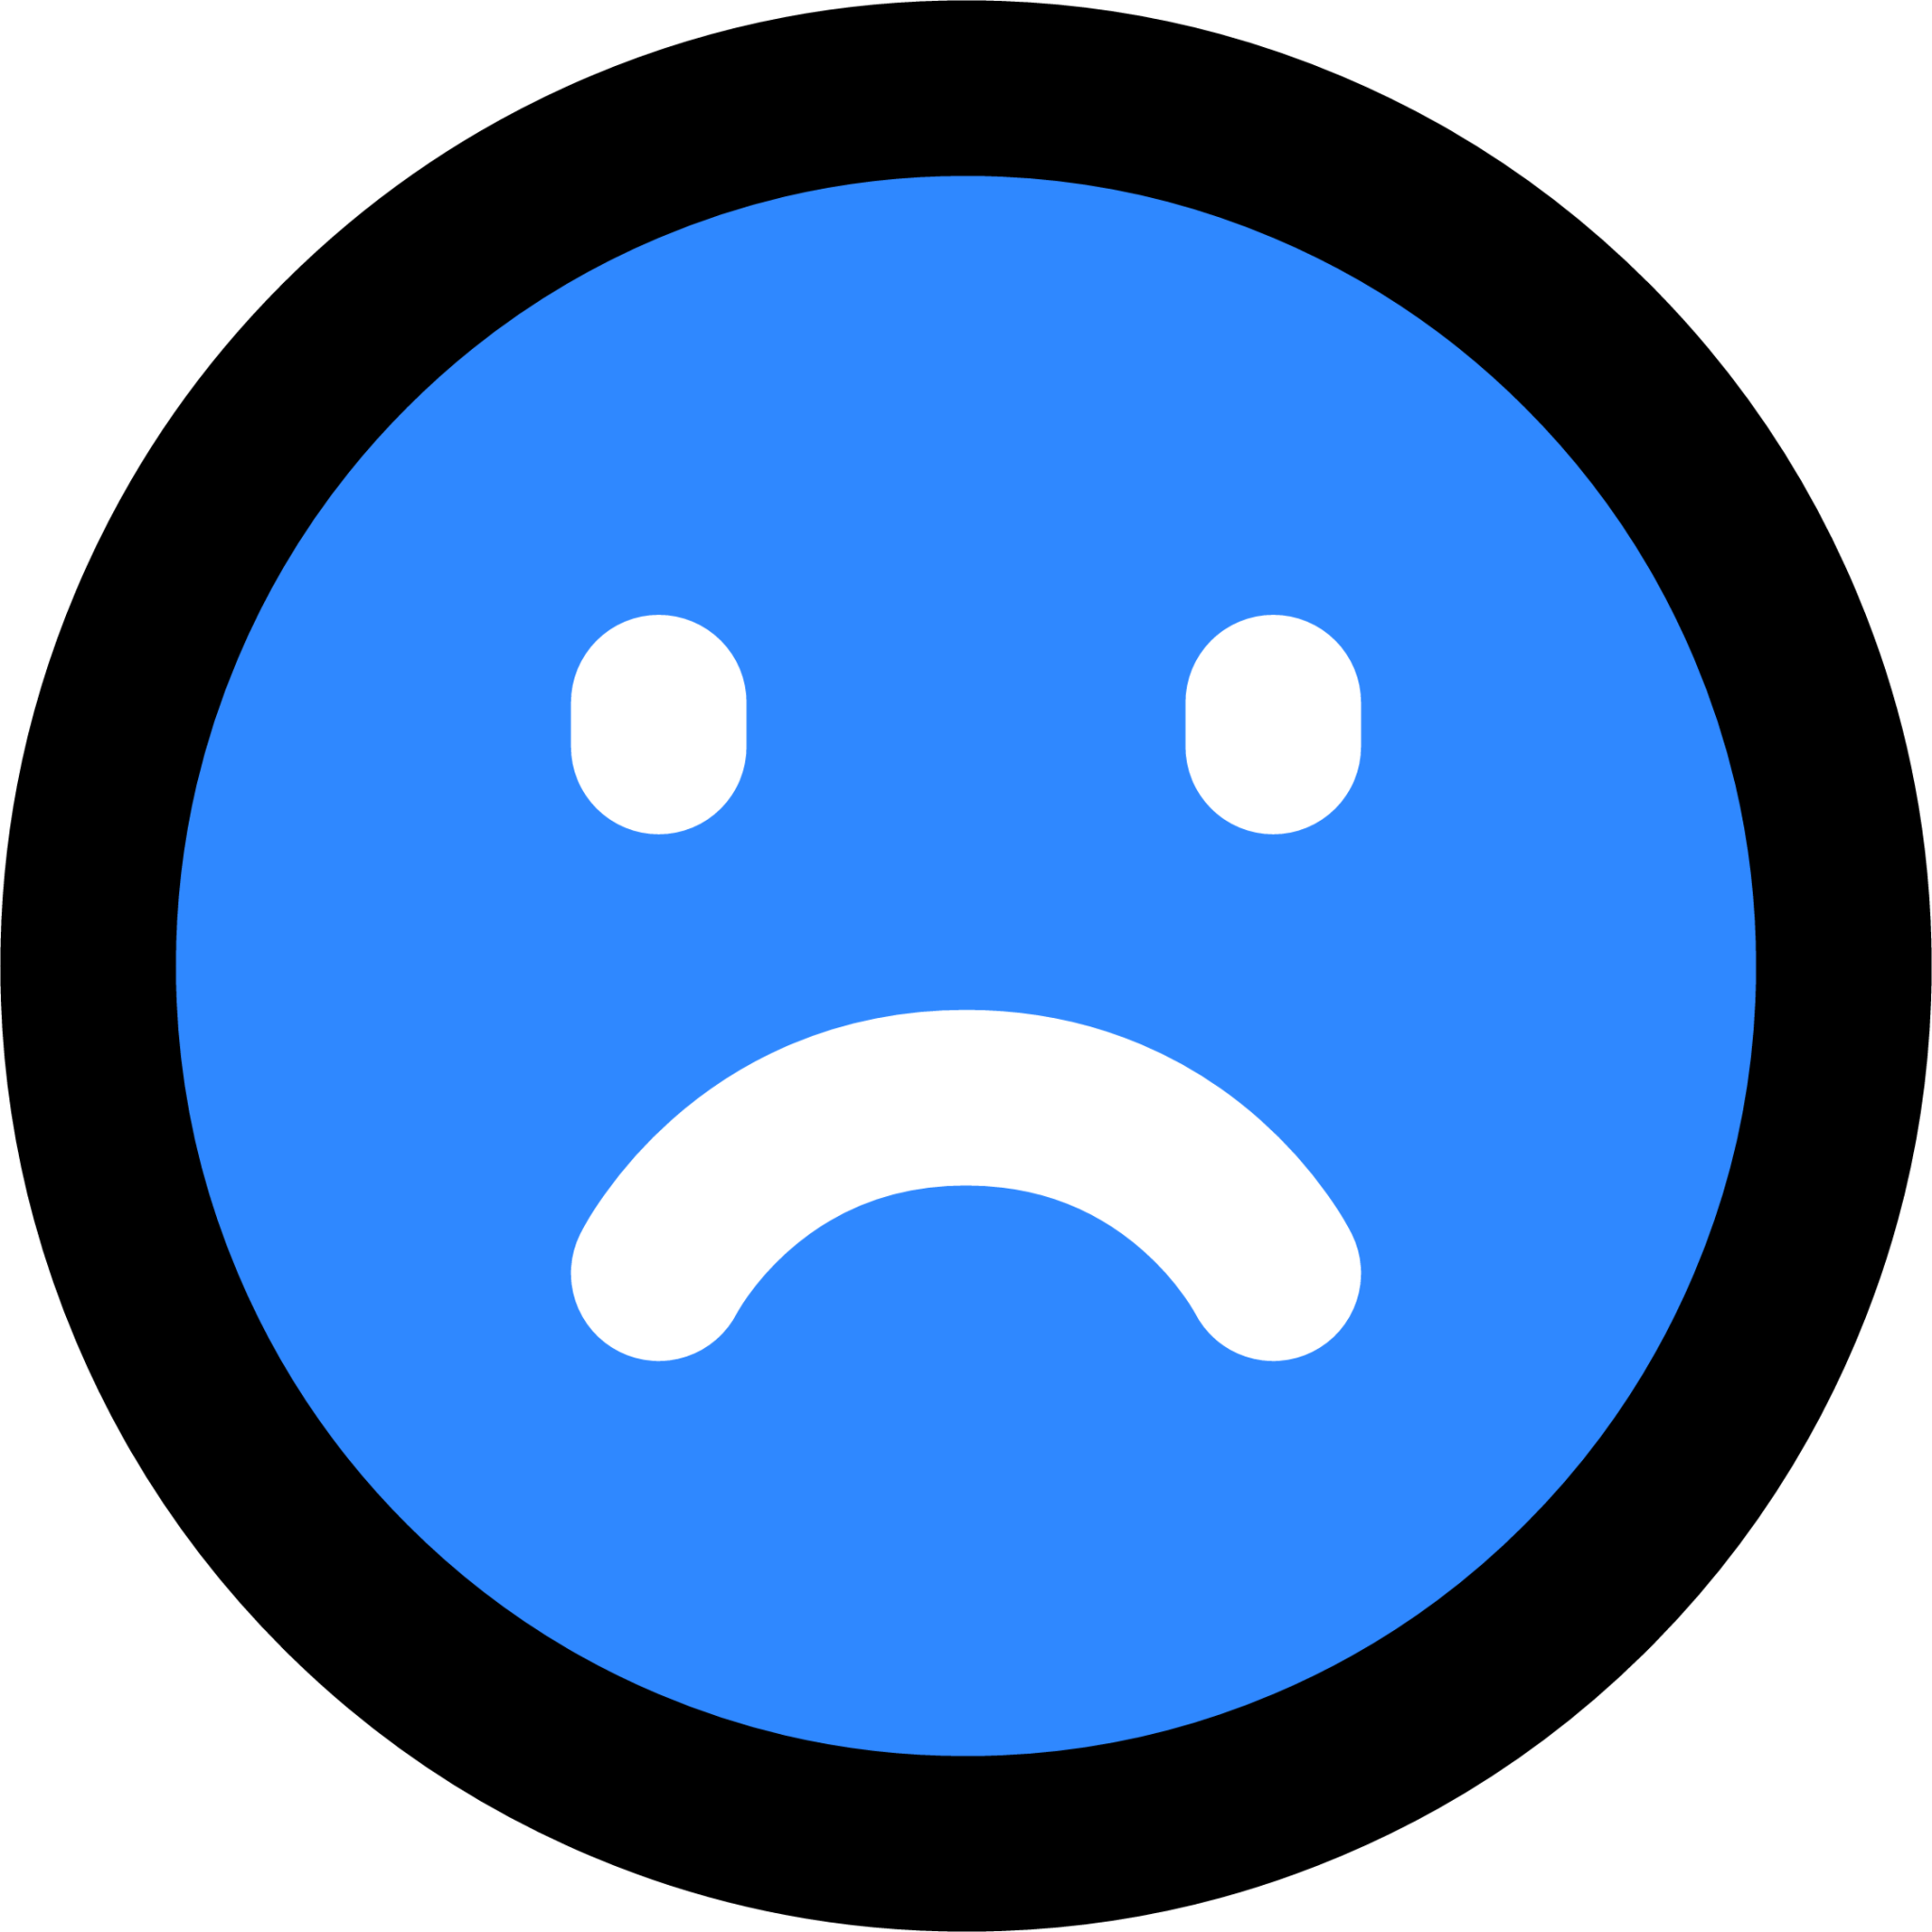 worried face icon